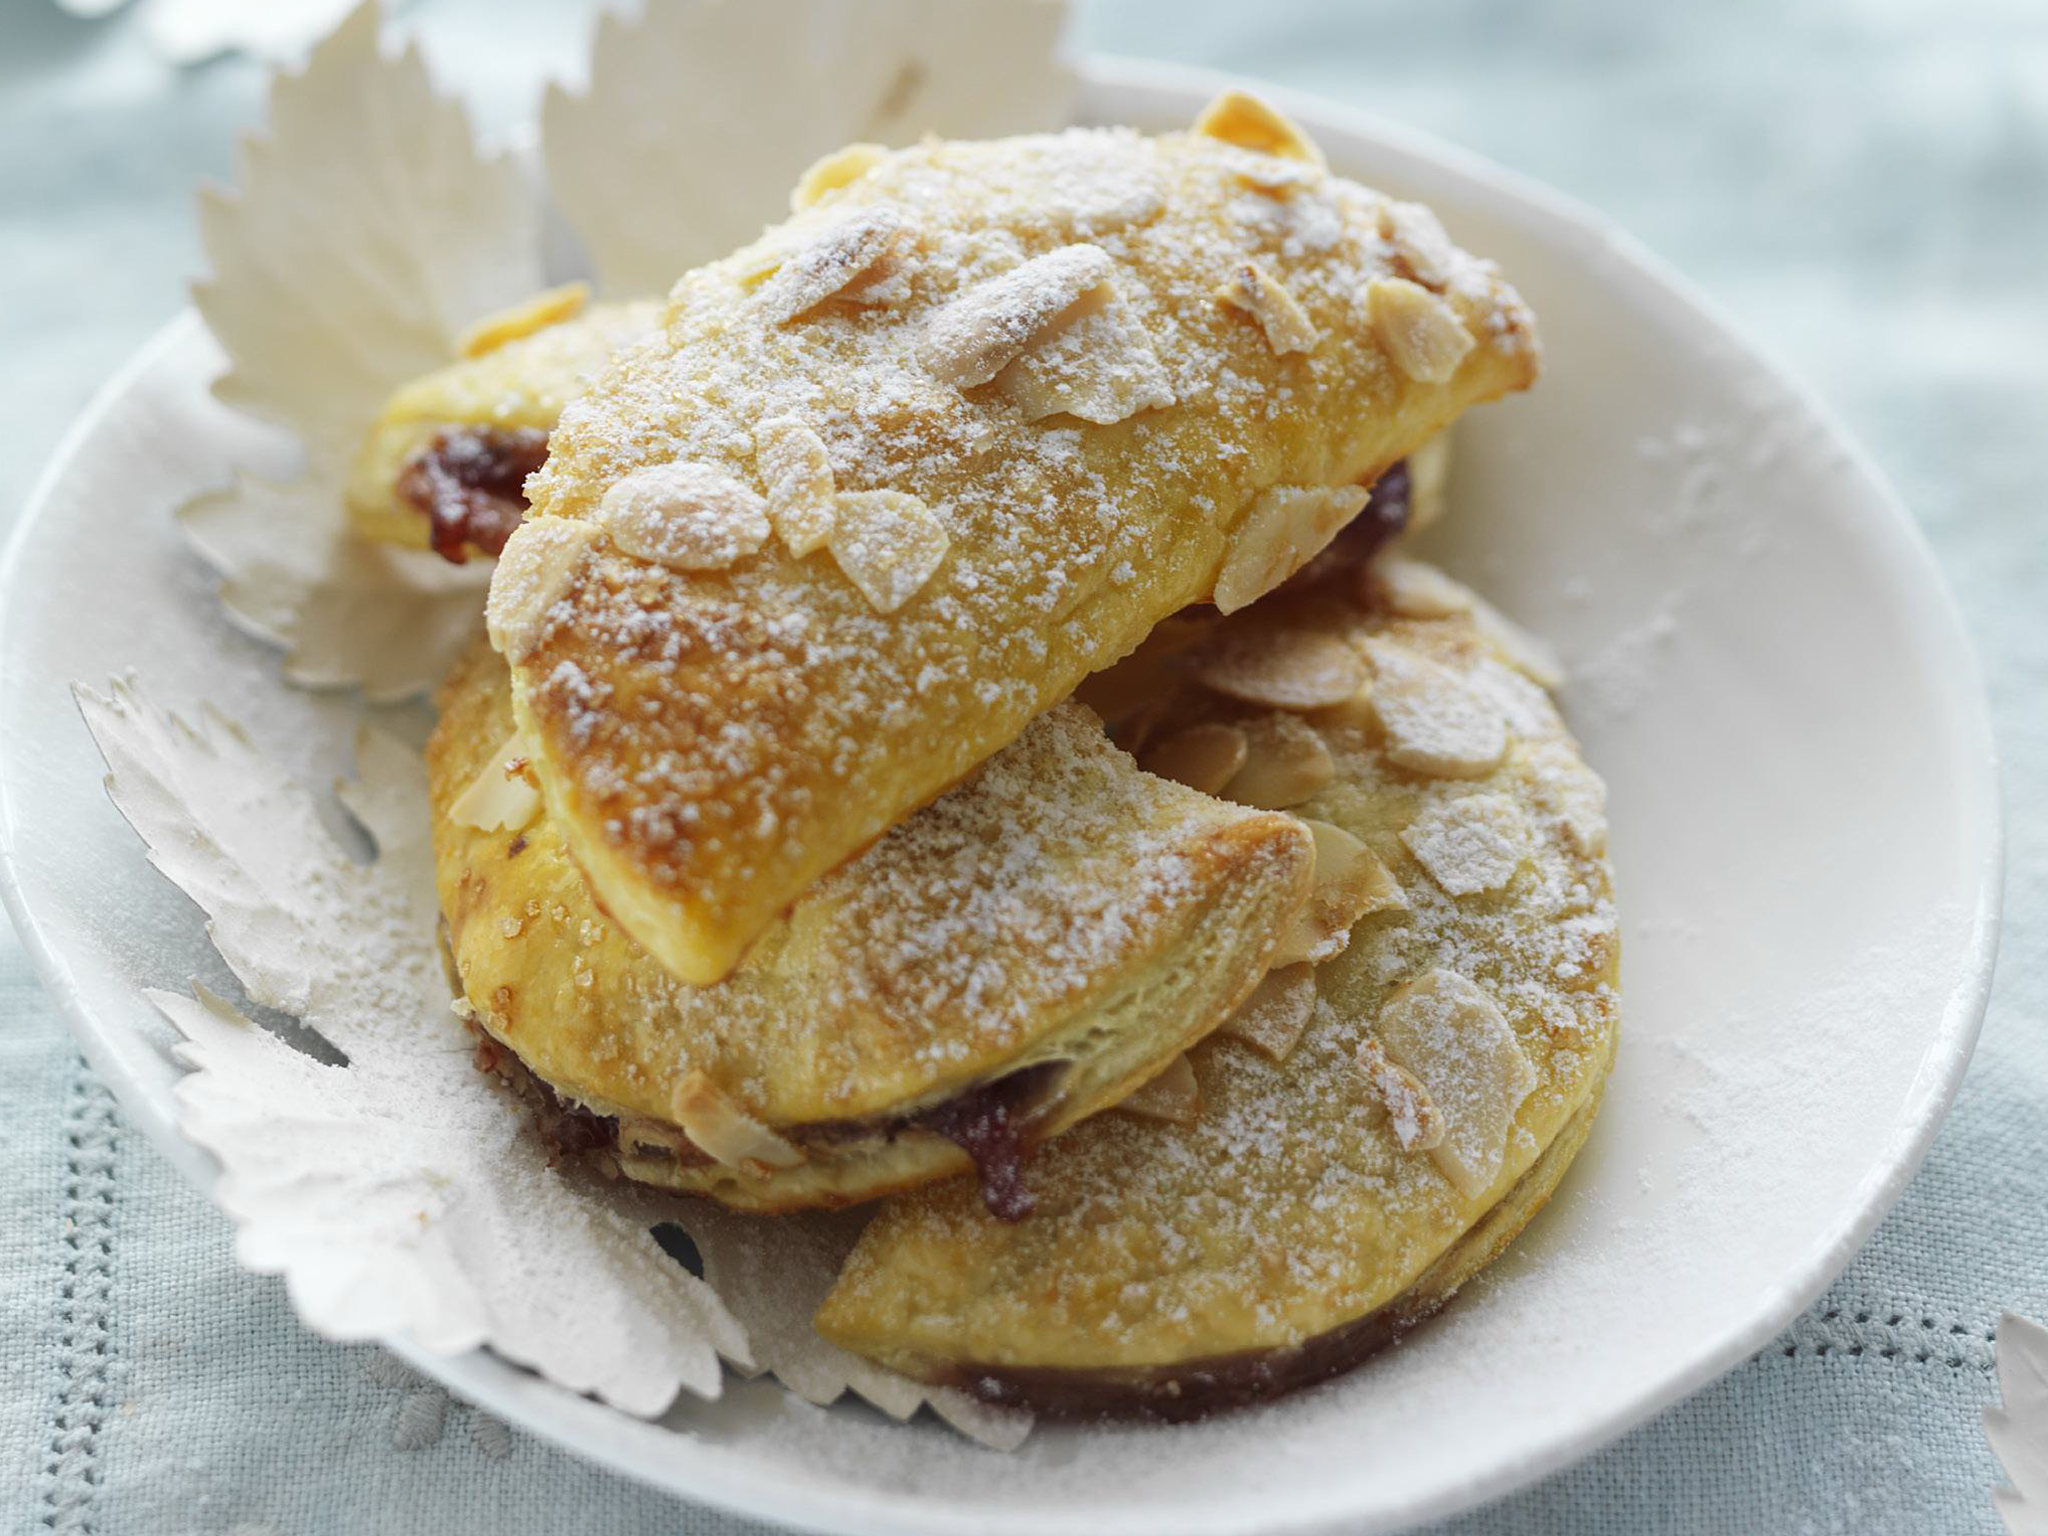 PLUM AND ALMOND Turnovers